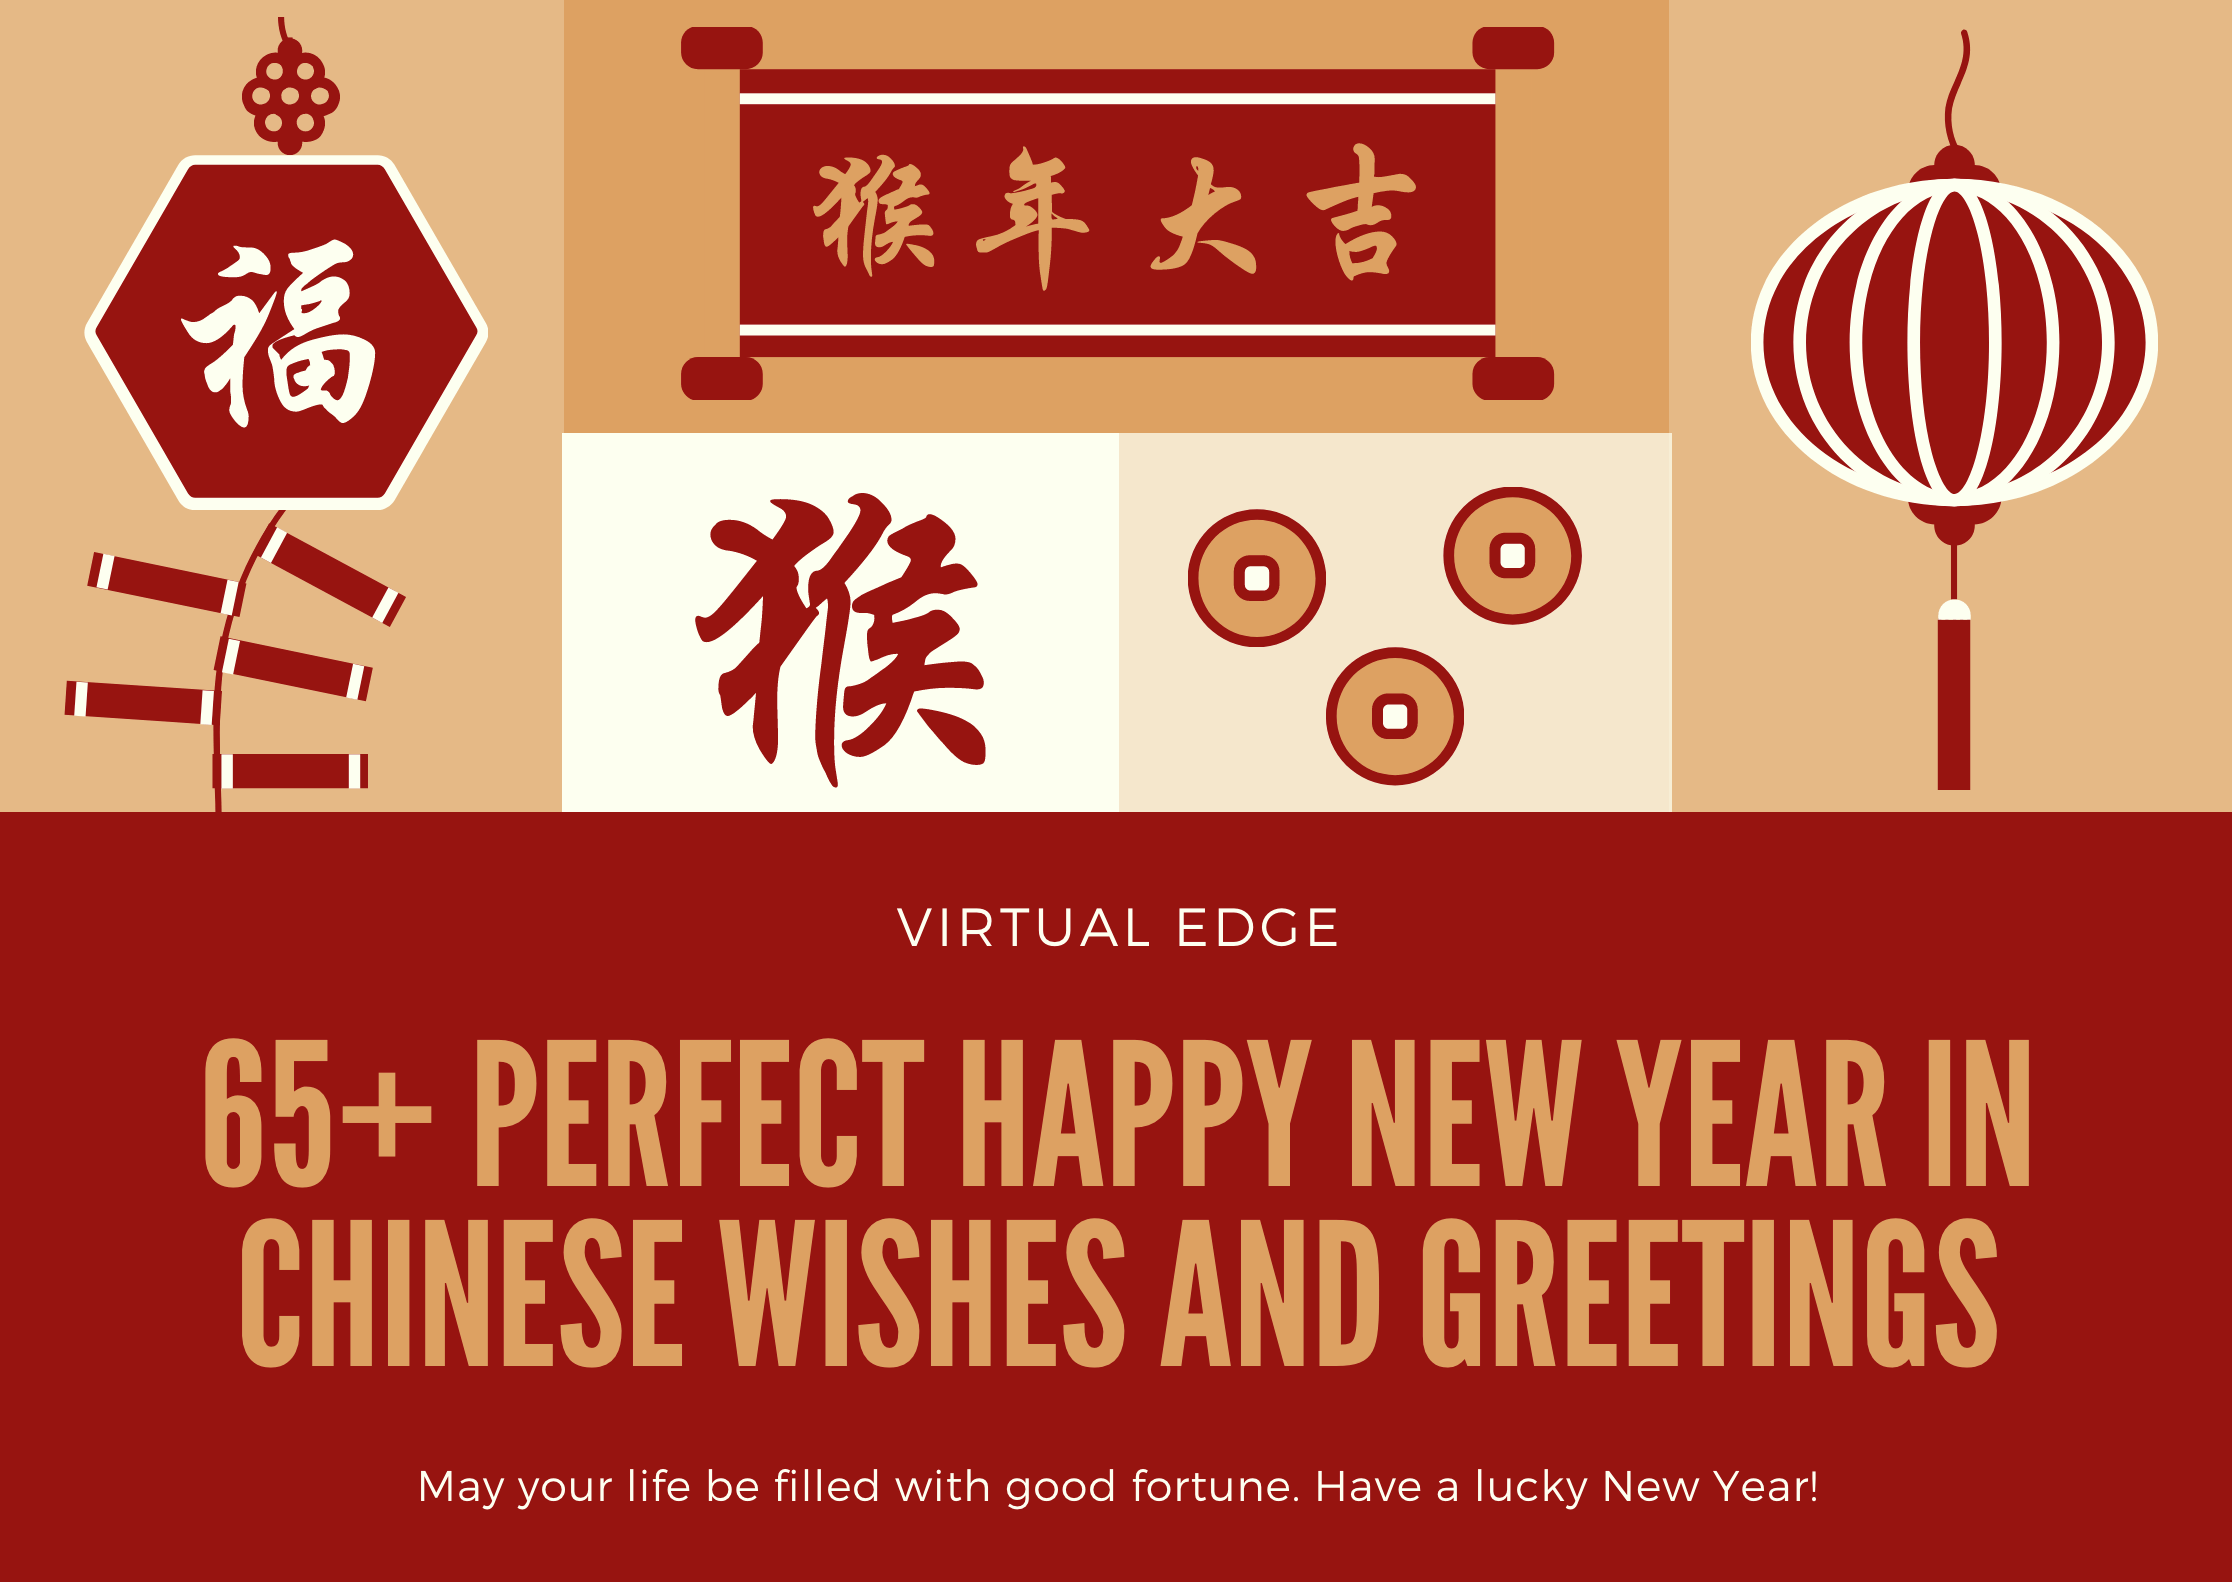 65+ Perfect Happy New Year in Chinese Wishes and Greetings